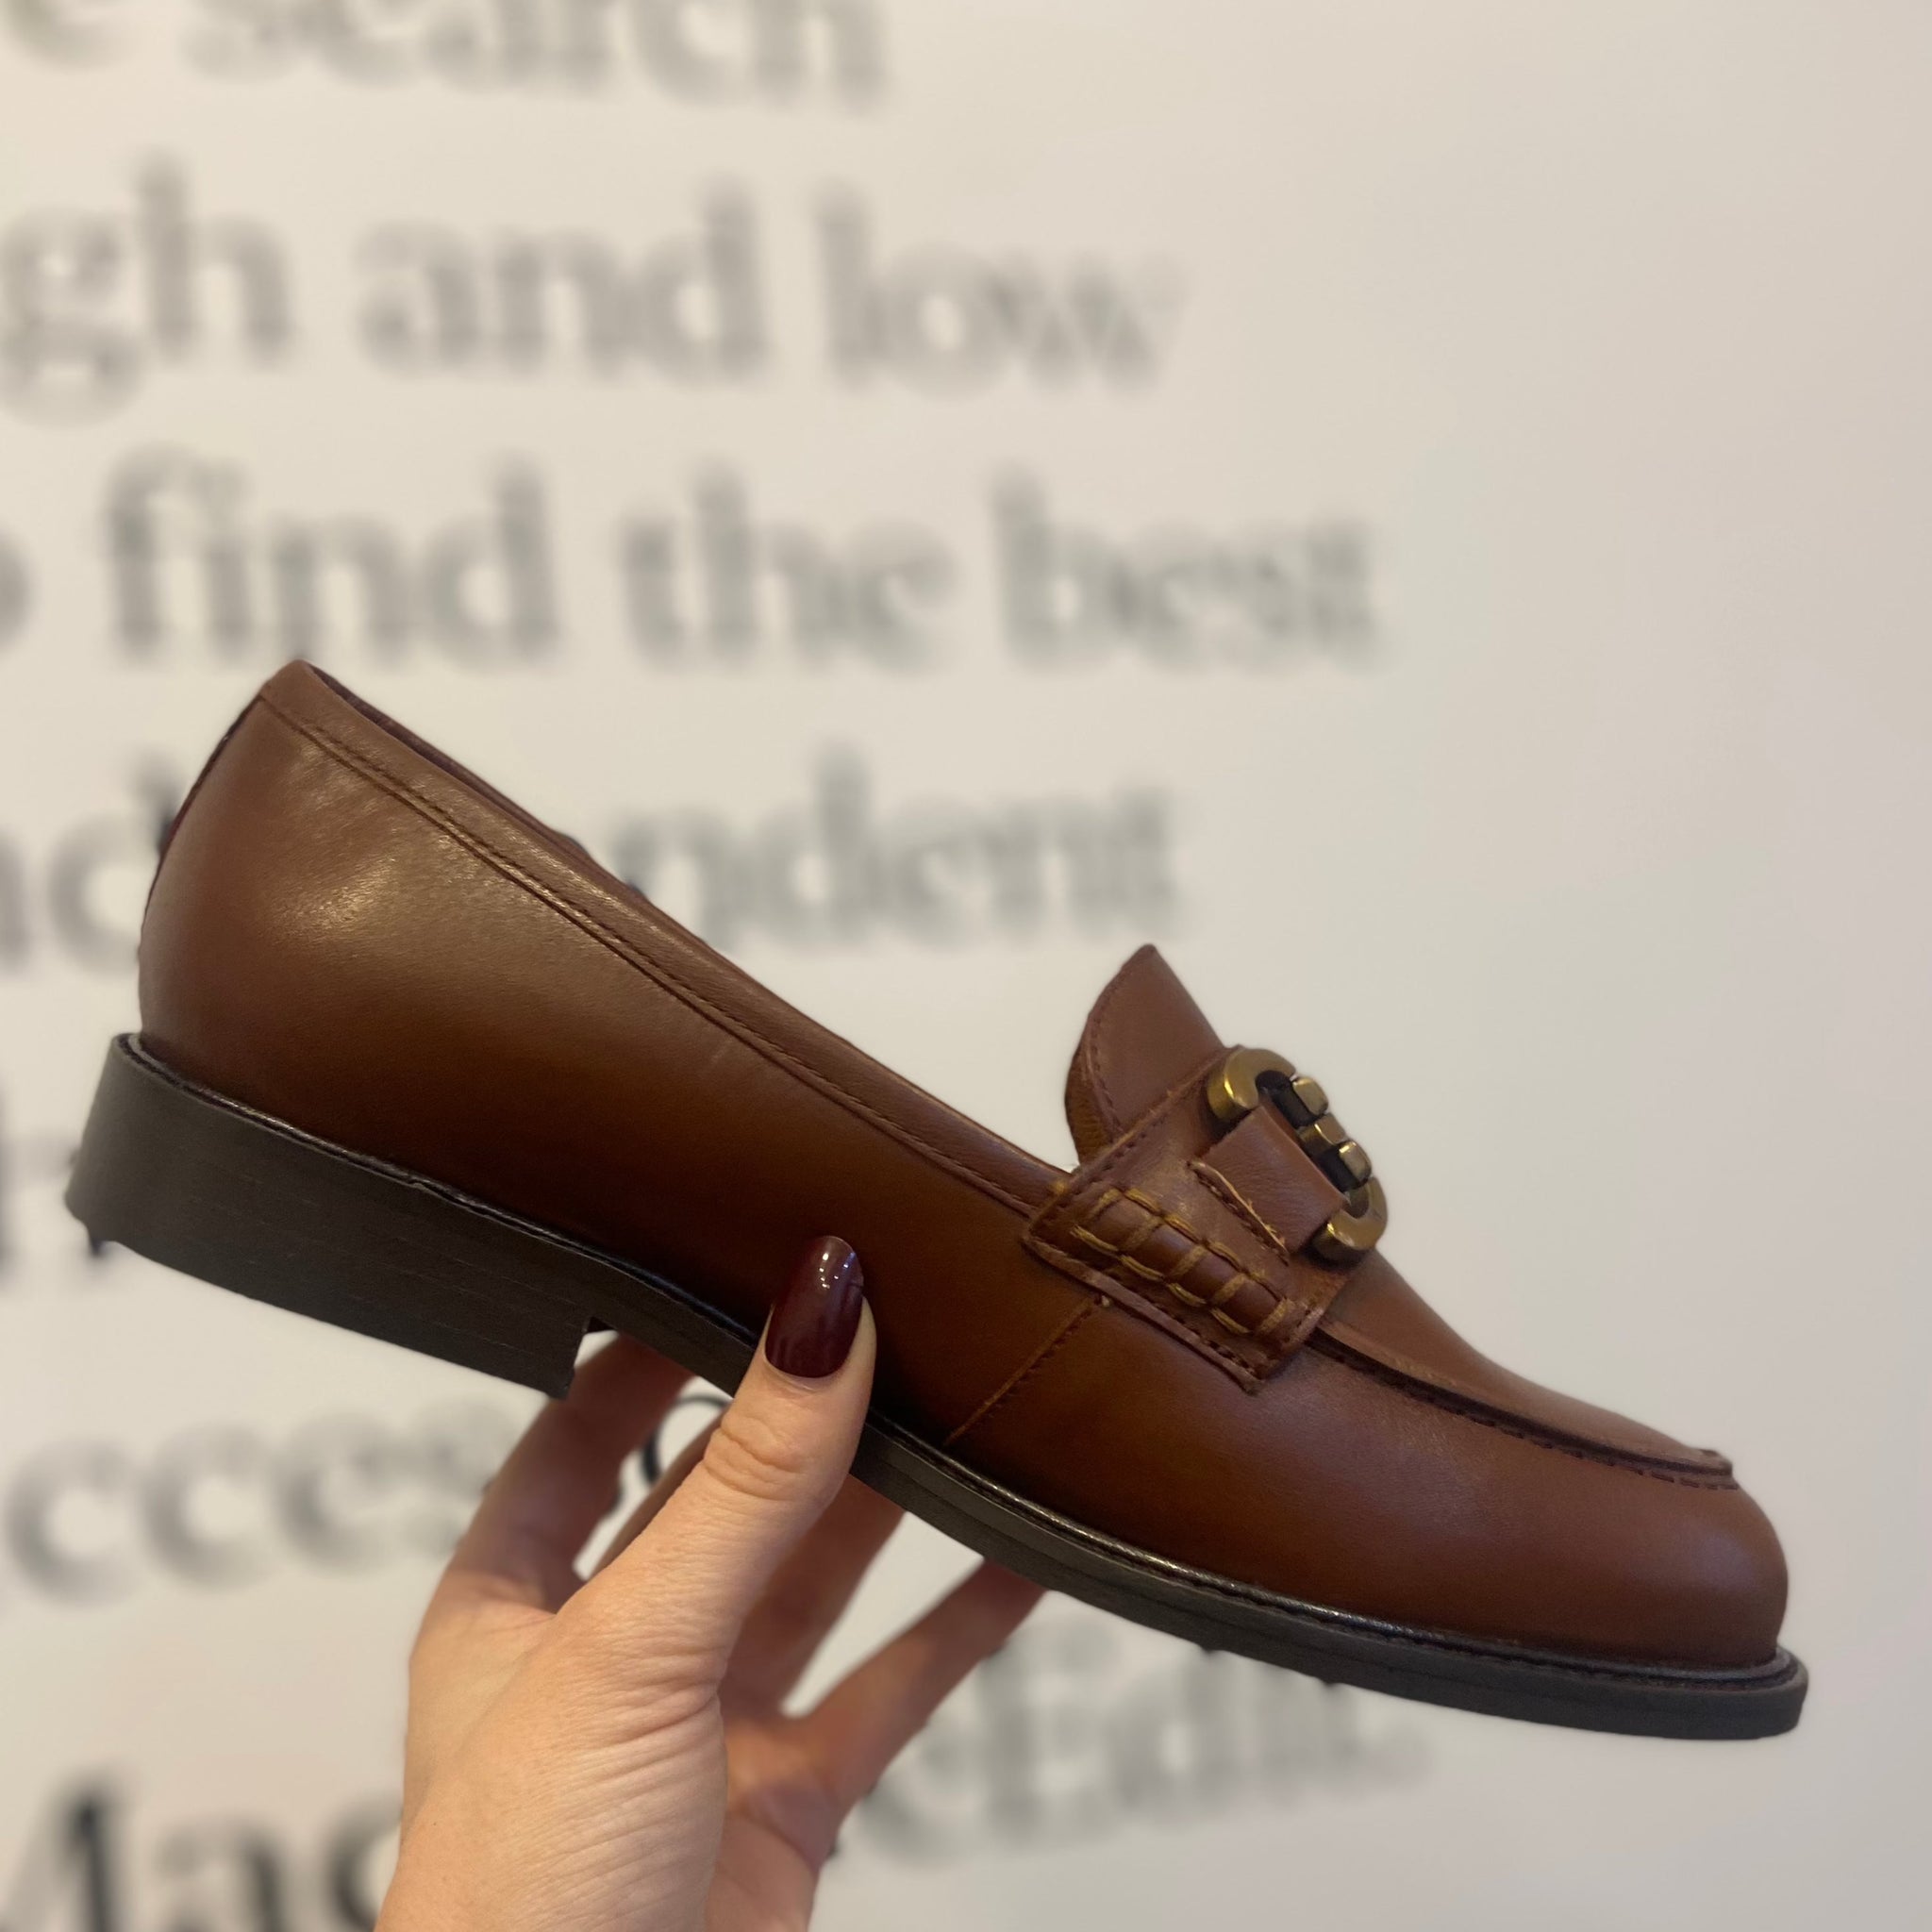 Maison Toufet Lyna Cognac Loafer - MADE THE EDIT